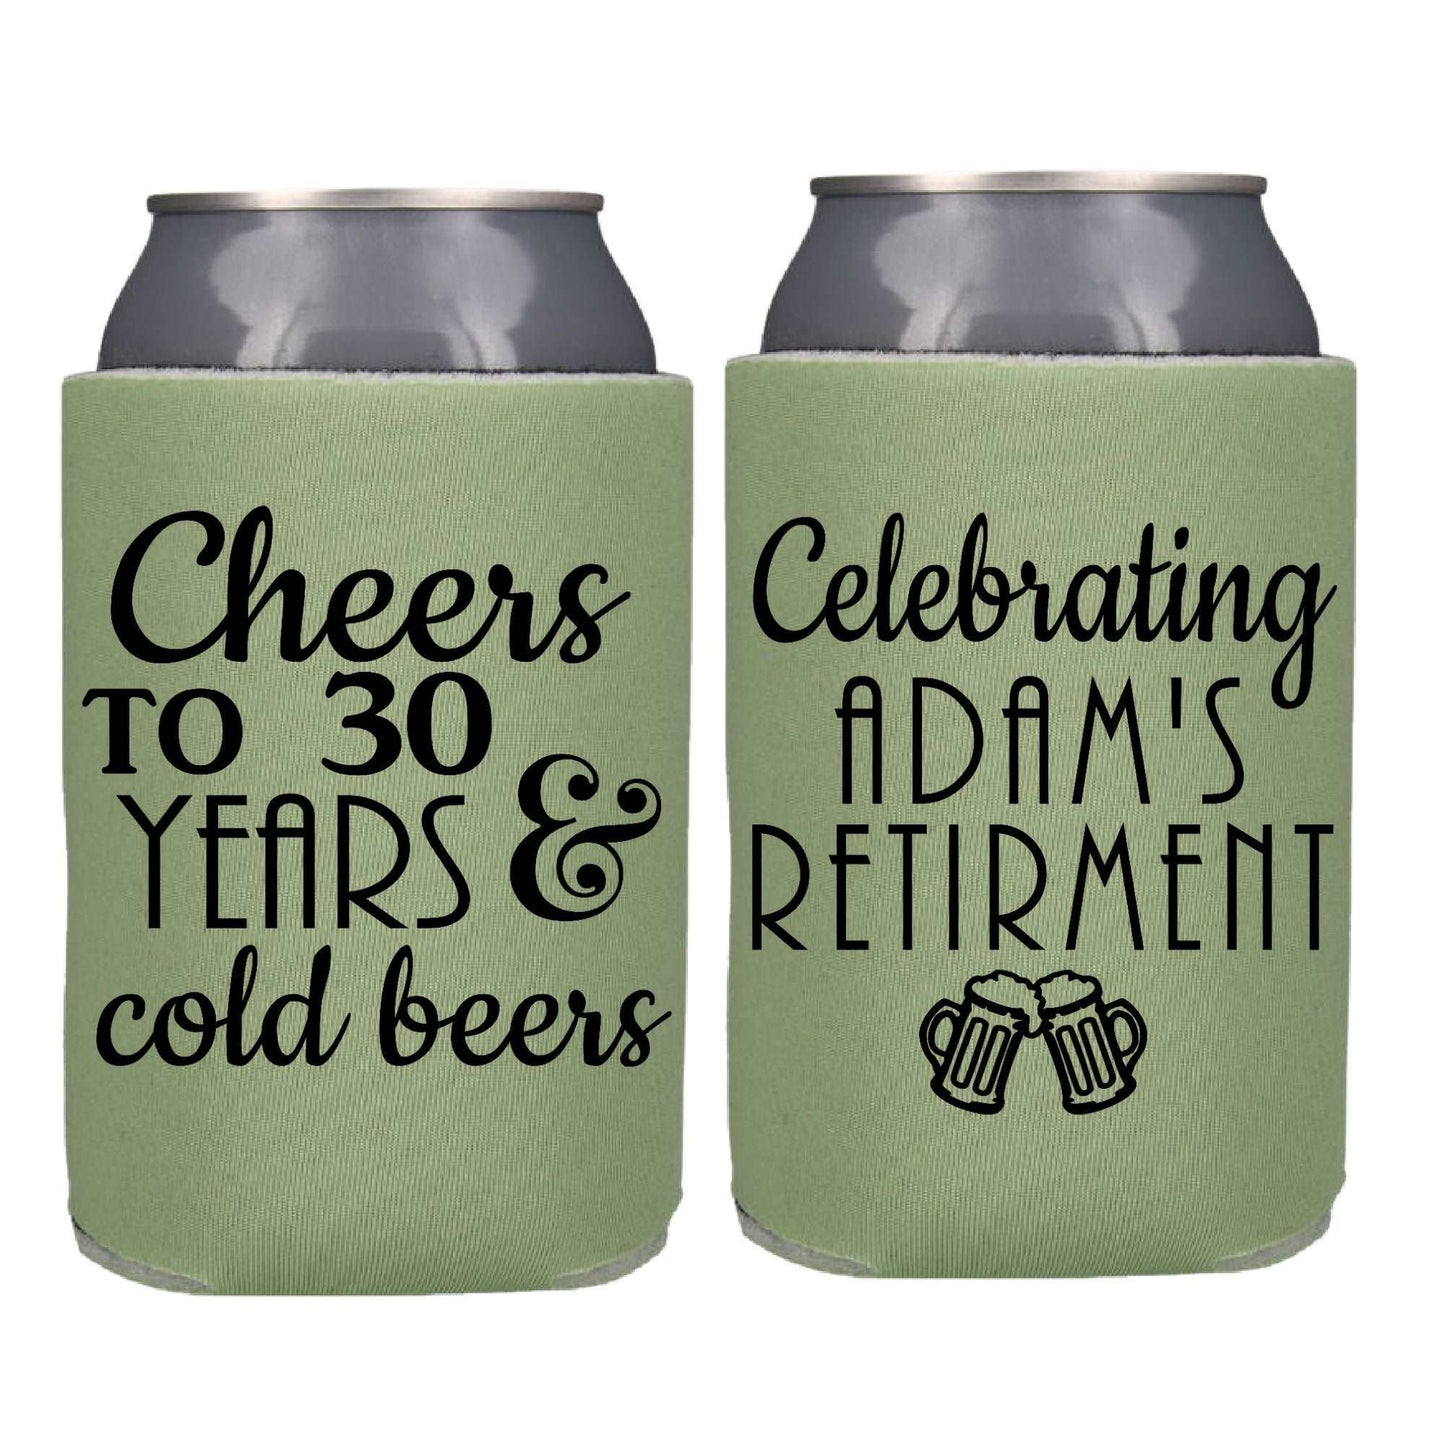 Cheers and Beers Retirement Screen printed Can Cooler